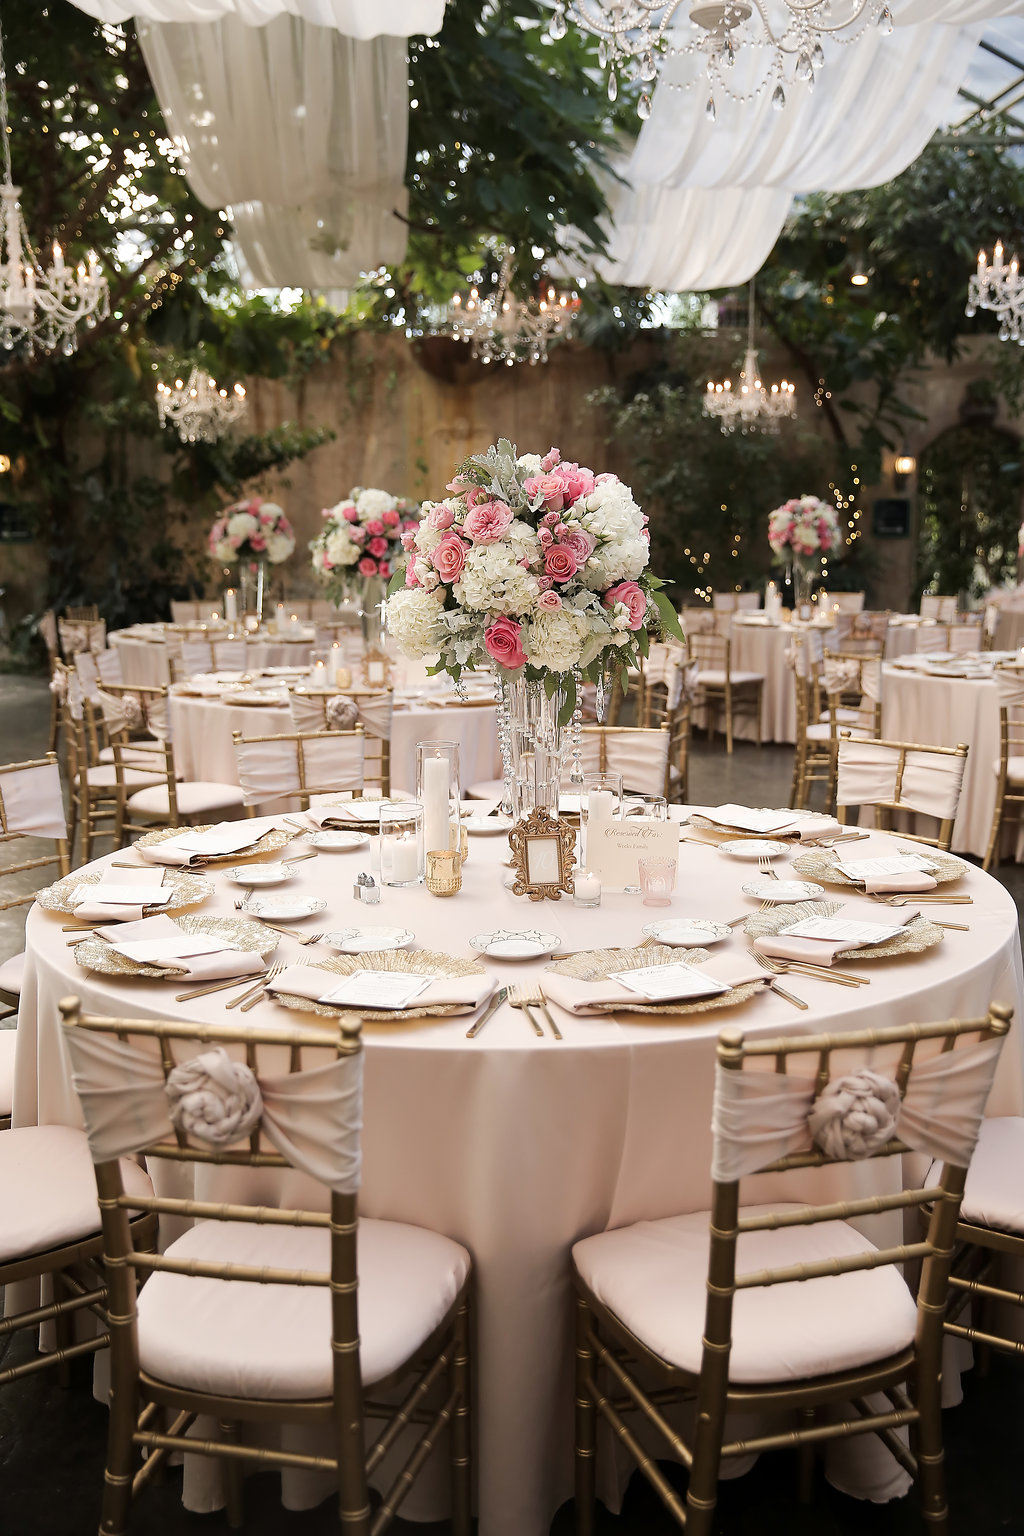 Fairytale Wedding at La Caille | La Caille Wedding Wedding | Salt Lake City Wedding | Blush and Gold | Michelle Leo Events | Utah Event Planner and Designer | Pepper Nix Photography